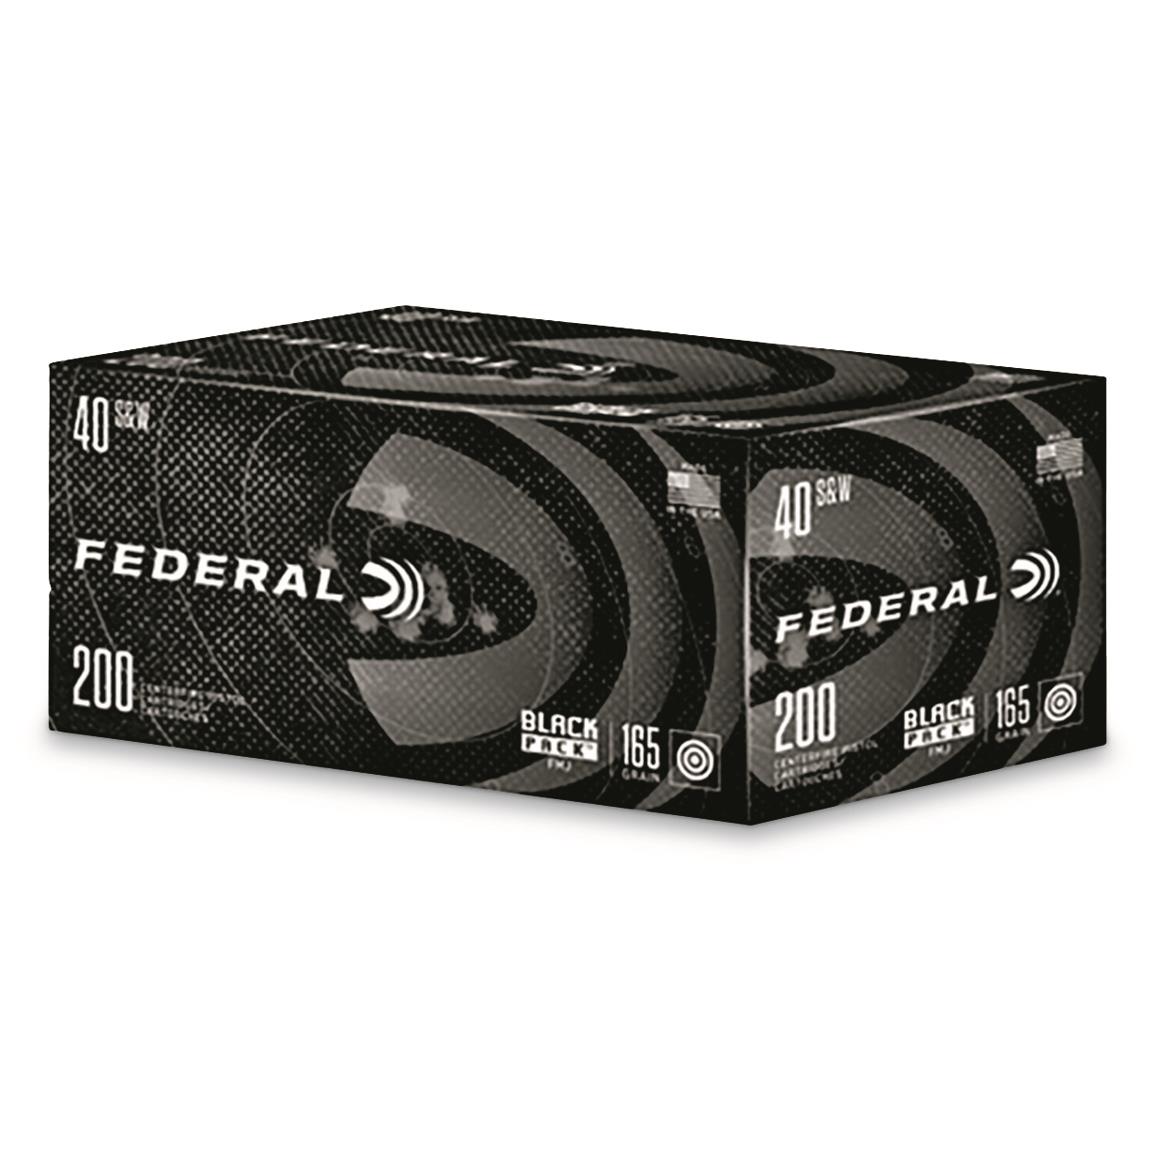 federal-black-pack-40-s-w-fmj-165-grain-200-rounds-712706-40-s